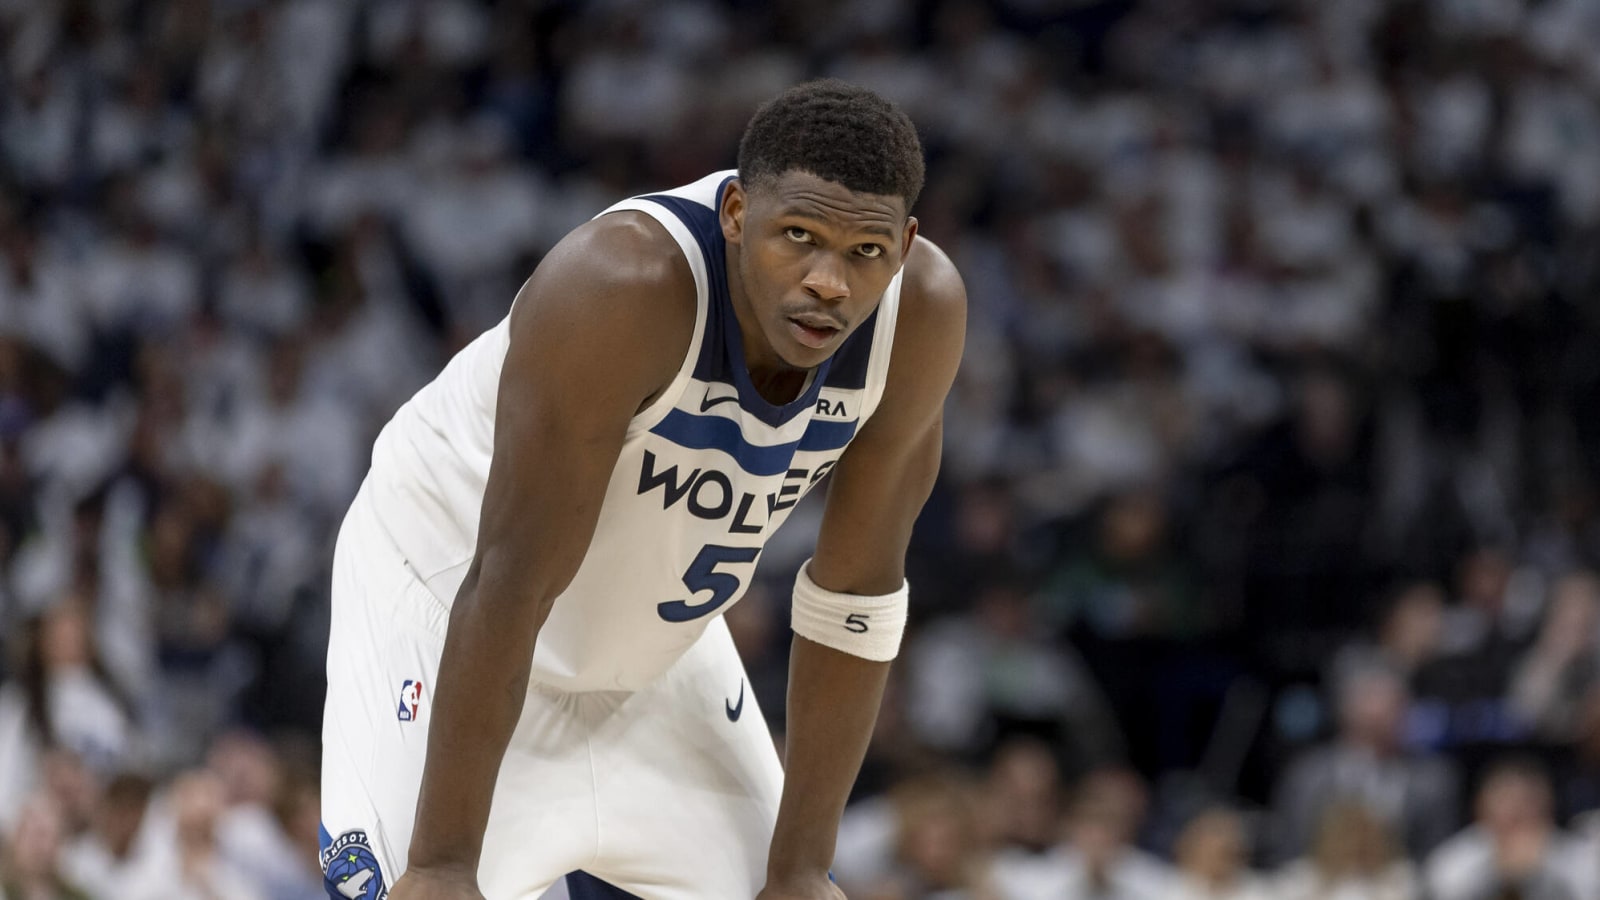 Minnesota Timberwolves’ Anthony Edwards Denies Momentum with Denver After 2 Straight Defeats